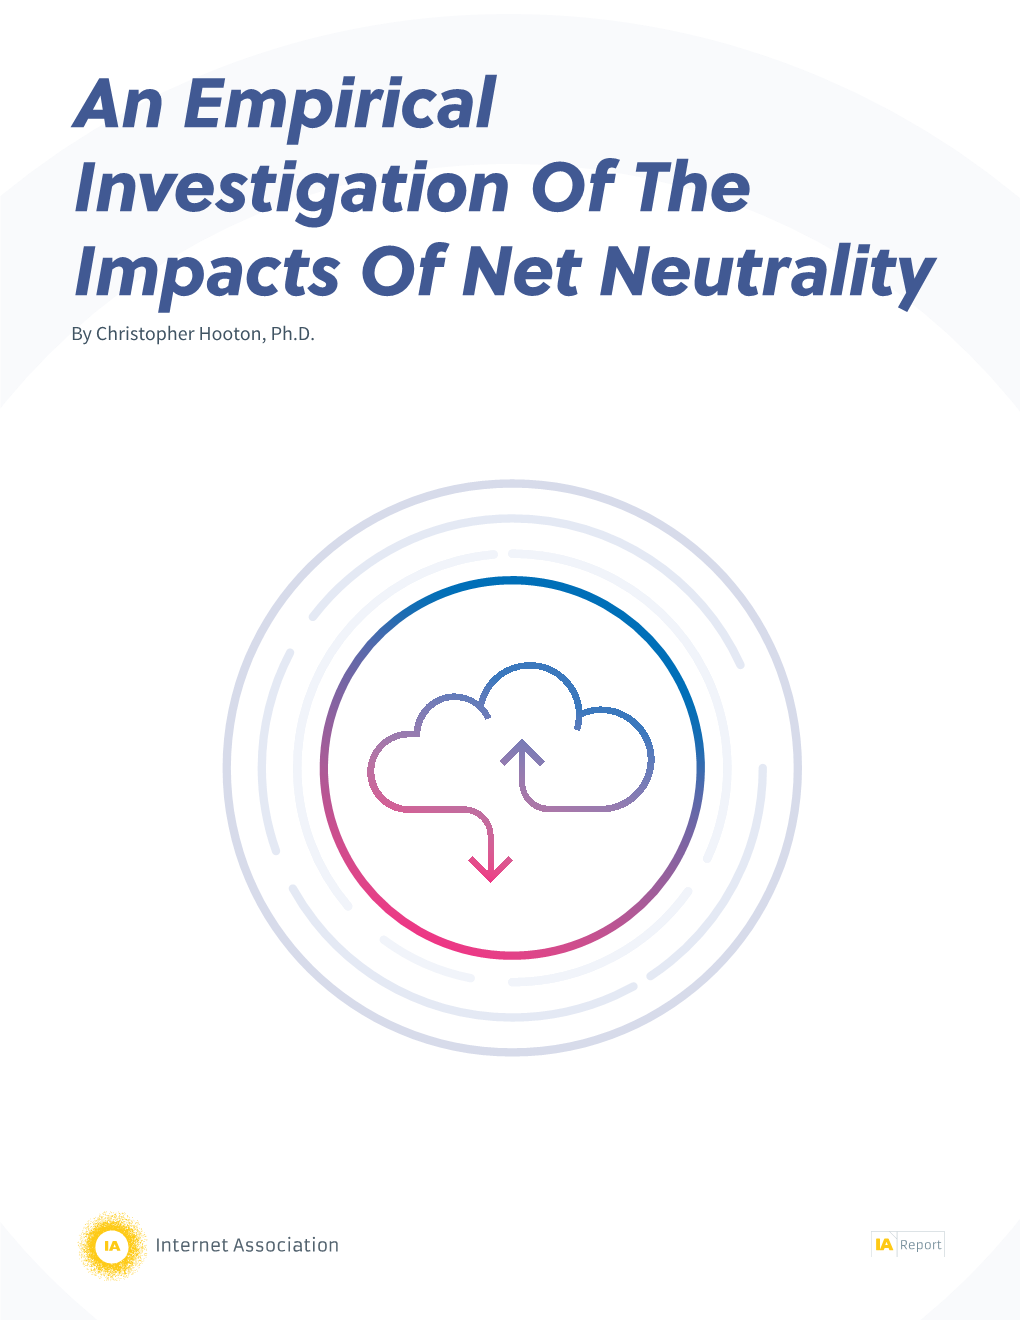 An Empirical Investigation of the Impacts of Net Neutrality by Christopher Hooton, Ph.D